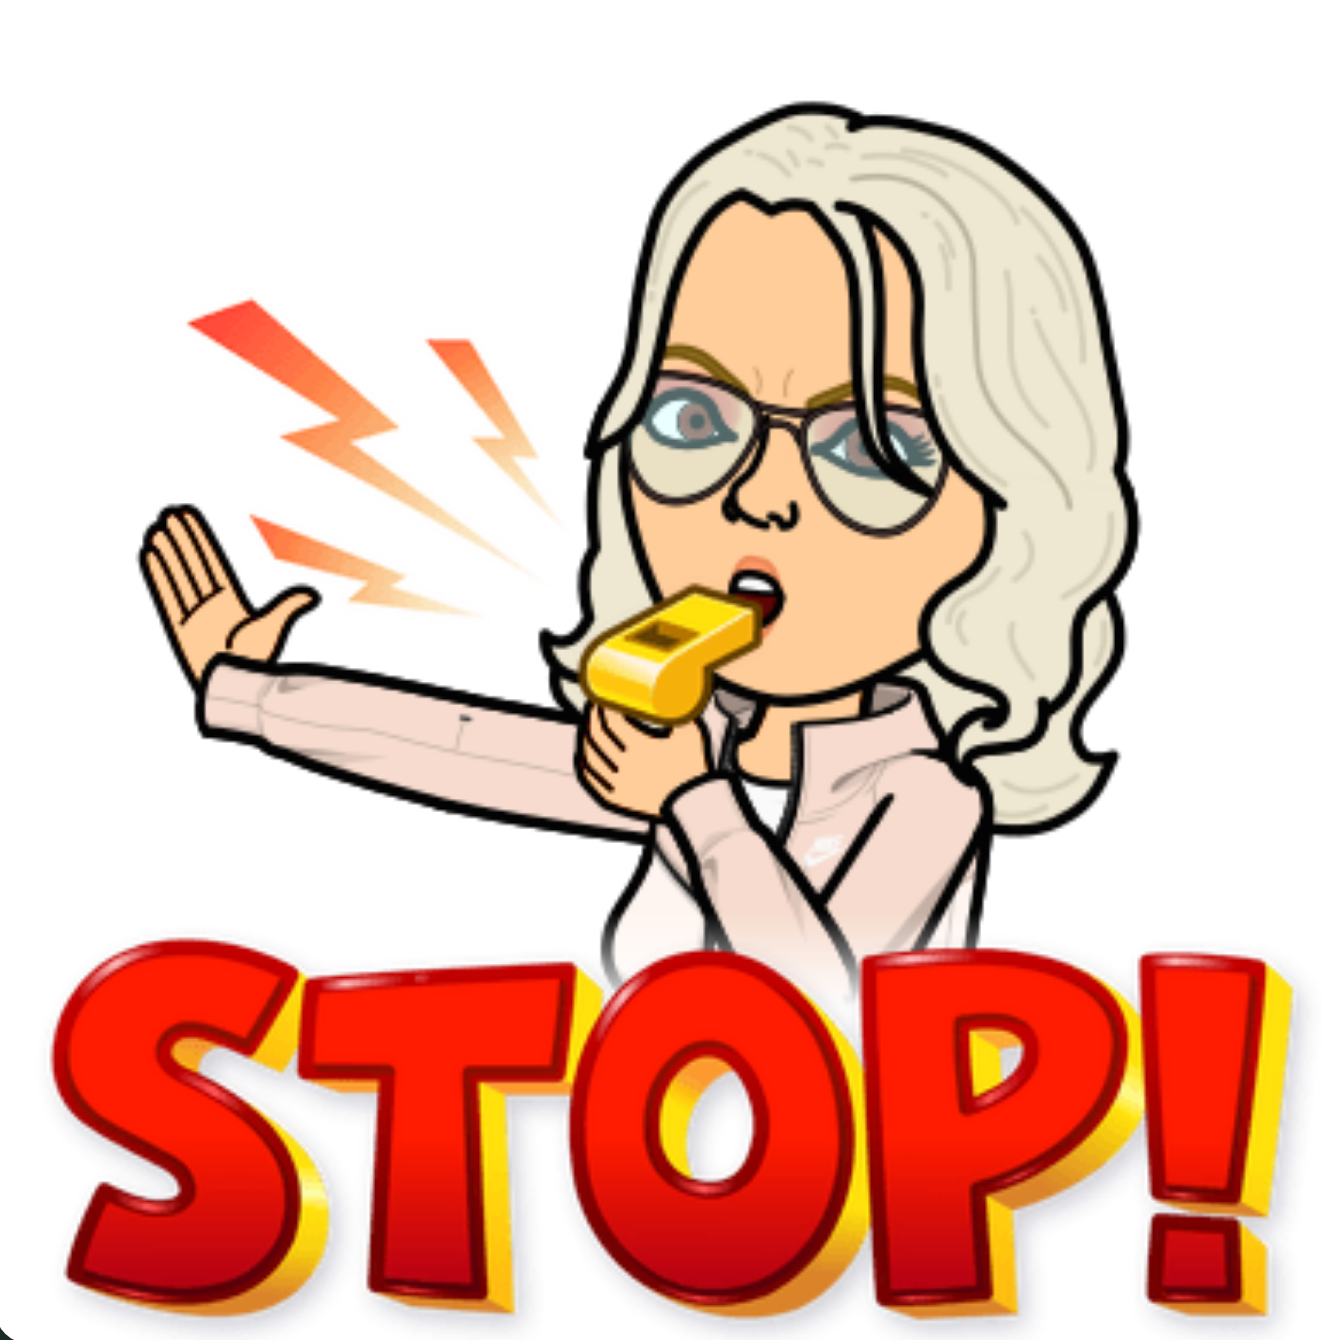 Bitmoji character blowing a wistle and motioning to stop.